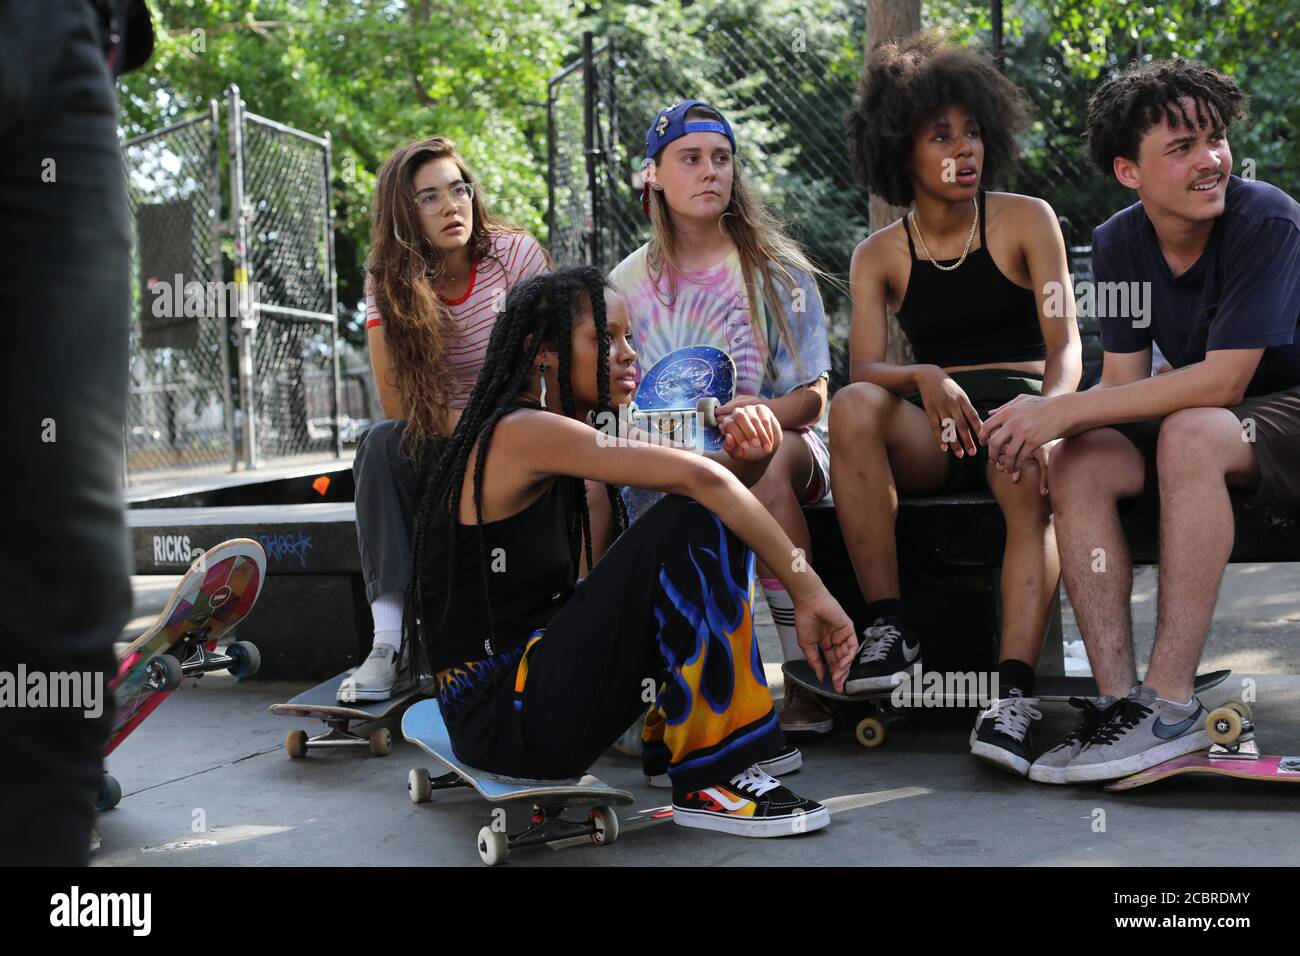 RACHELLE VINBERG, NINA MORAN, DEDE LOVELACE, AJANI RUSSELL and CRYSTAL  MOSELLE in SKATE KITCHEN (2018), directed by CRYSTAL MOSELLE. Credit: BOW  AND ARROW ENTERTAINMENT/PULSE FILMS/RT FEATURES / Album Stock Photo - Alamy